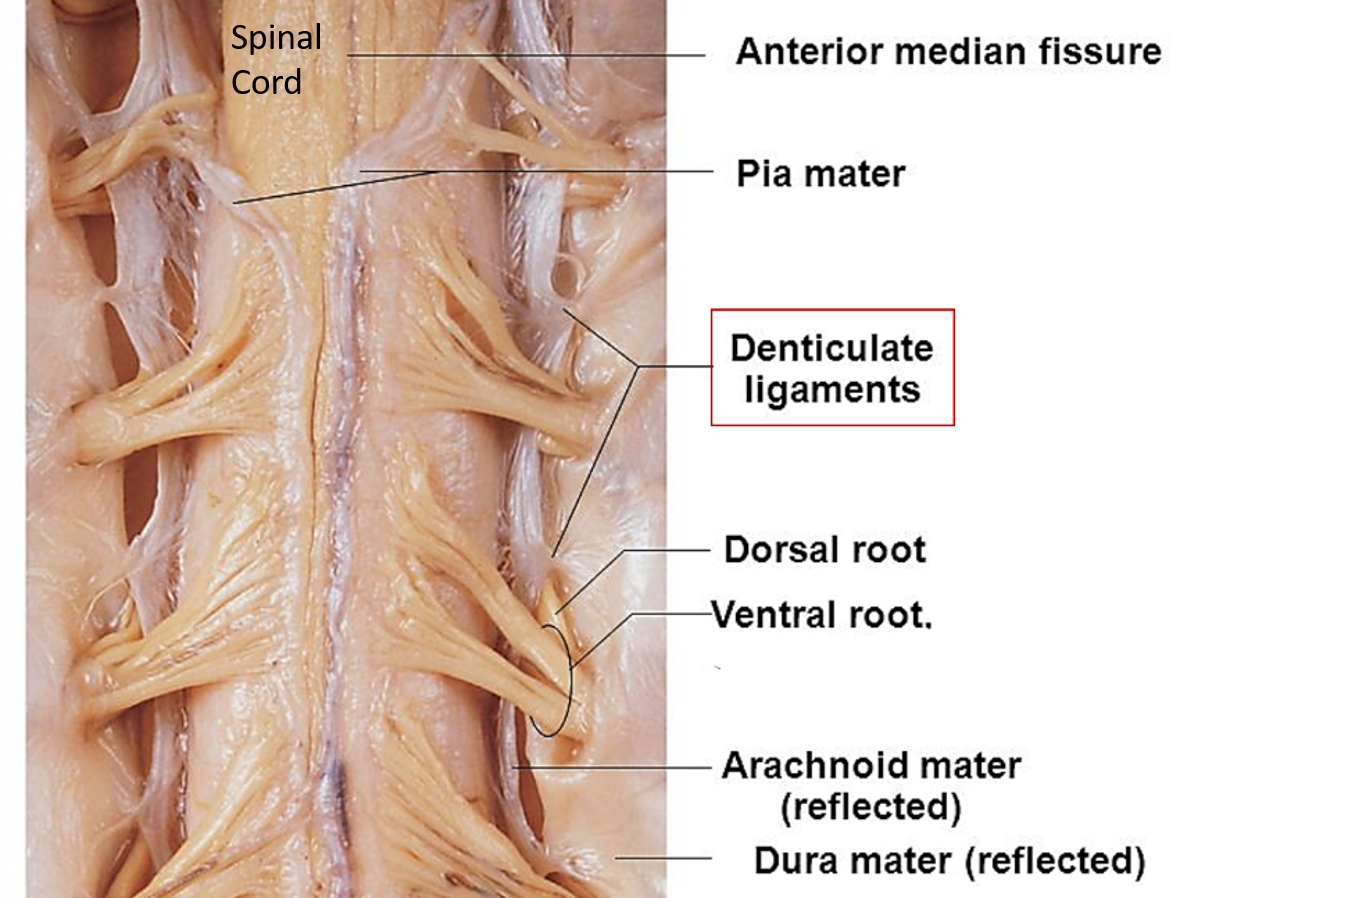 Denticulate ligaments of spinal cord